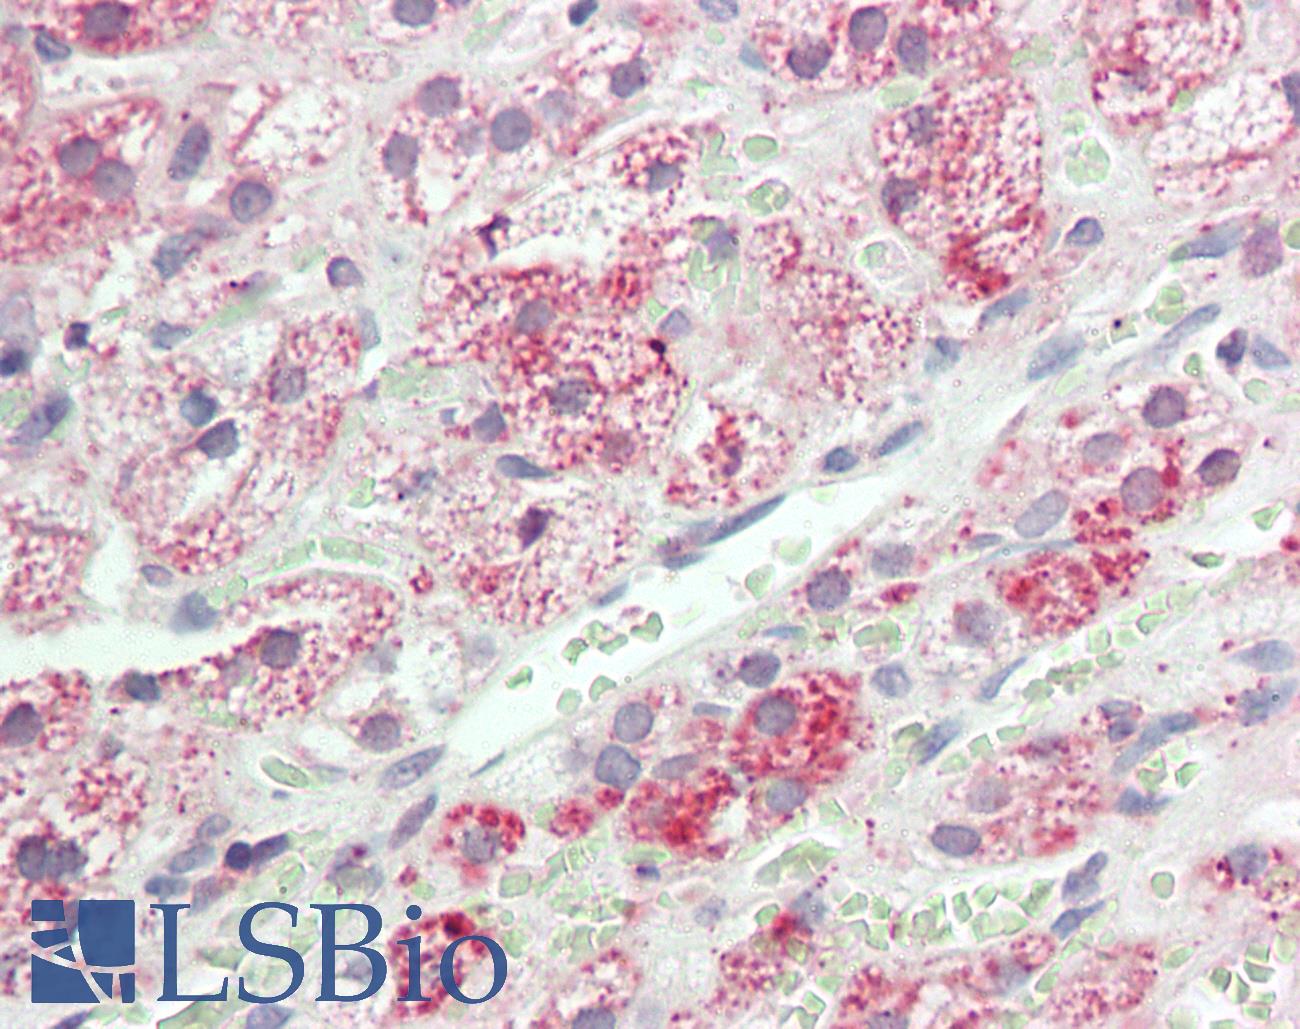 VCAM1 / CD106 Antibody - Anti-VCAM1 / CD106 antibody IHC staining of human adrenal. Immunohistochemistry of formalin-fixed, paraffin-embedded tissue after heat-induced antigen retrieval. Antibody concentration 5 ug/ml.